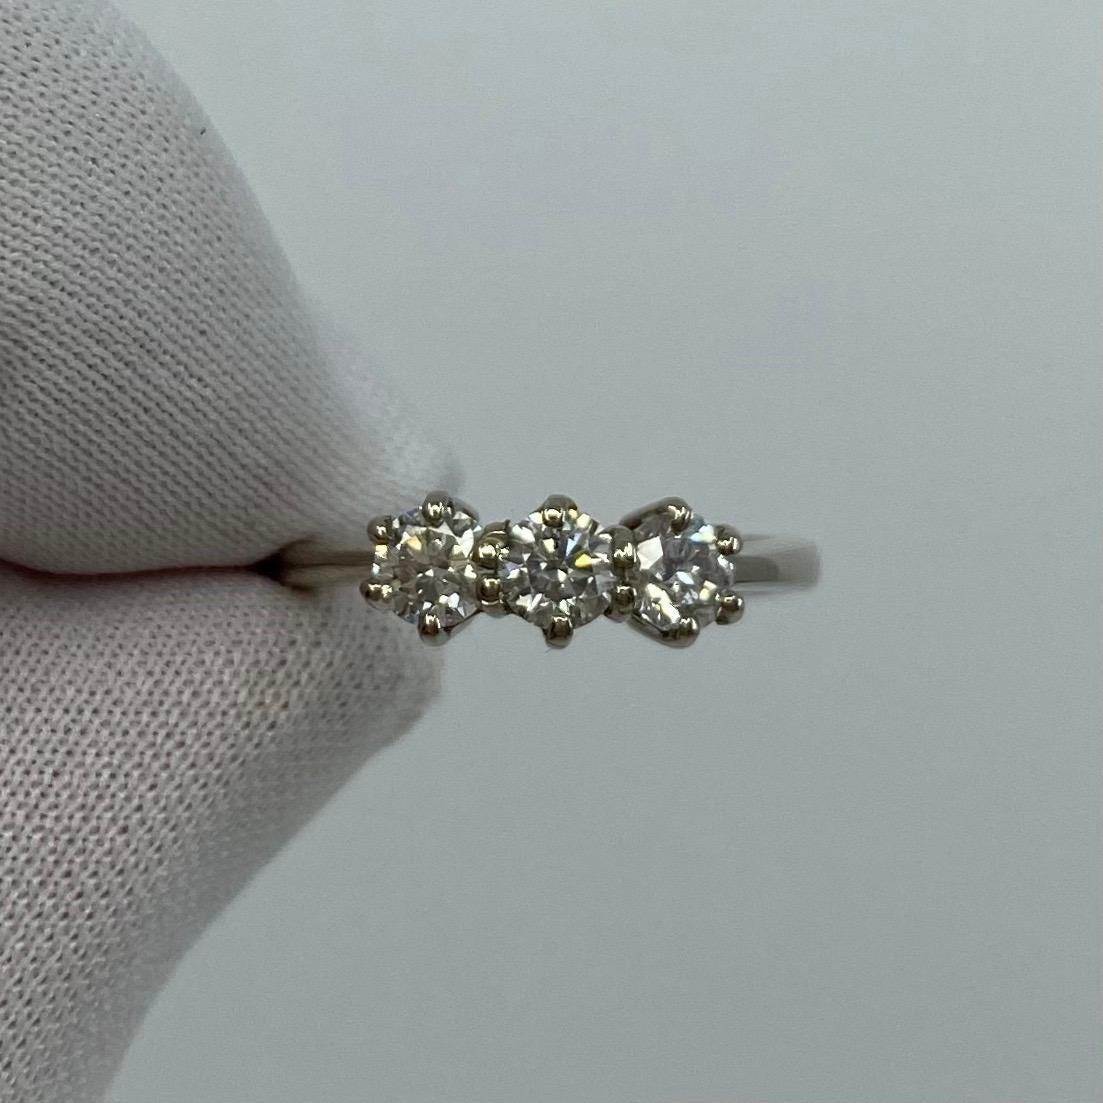 18k White Gold Diamond Three Stone Ring.

A stunning 18k white gold diamond ring set with 3 beautiful white diamonds.
The diamonds are approx Si1-Si2 Clarity and G/H Colour. 0.75ct total weight. 0.25 carat each stone.
All have an excellent round